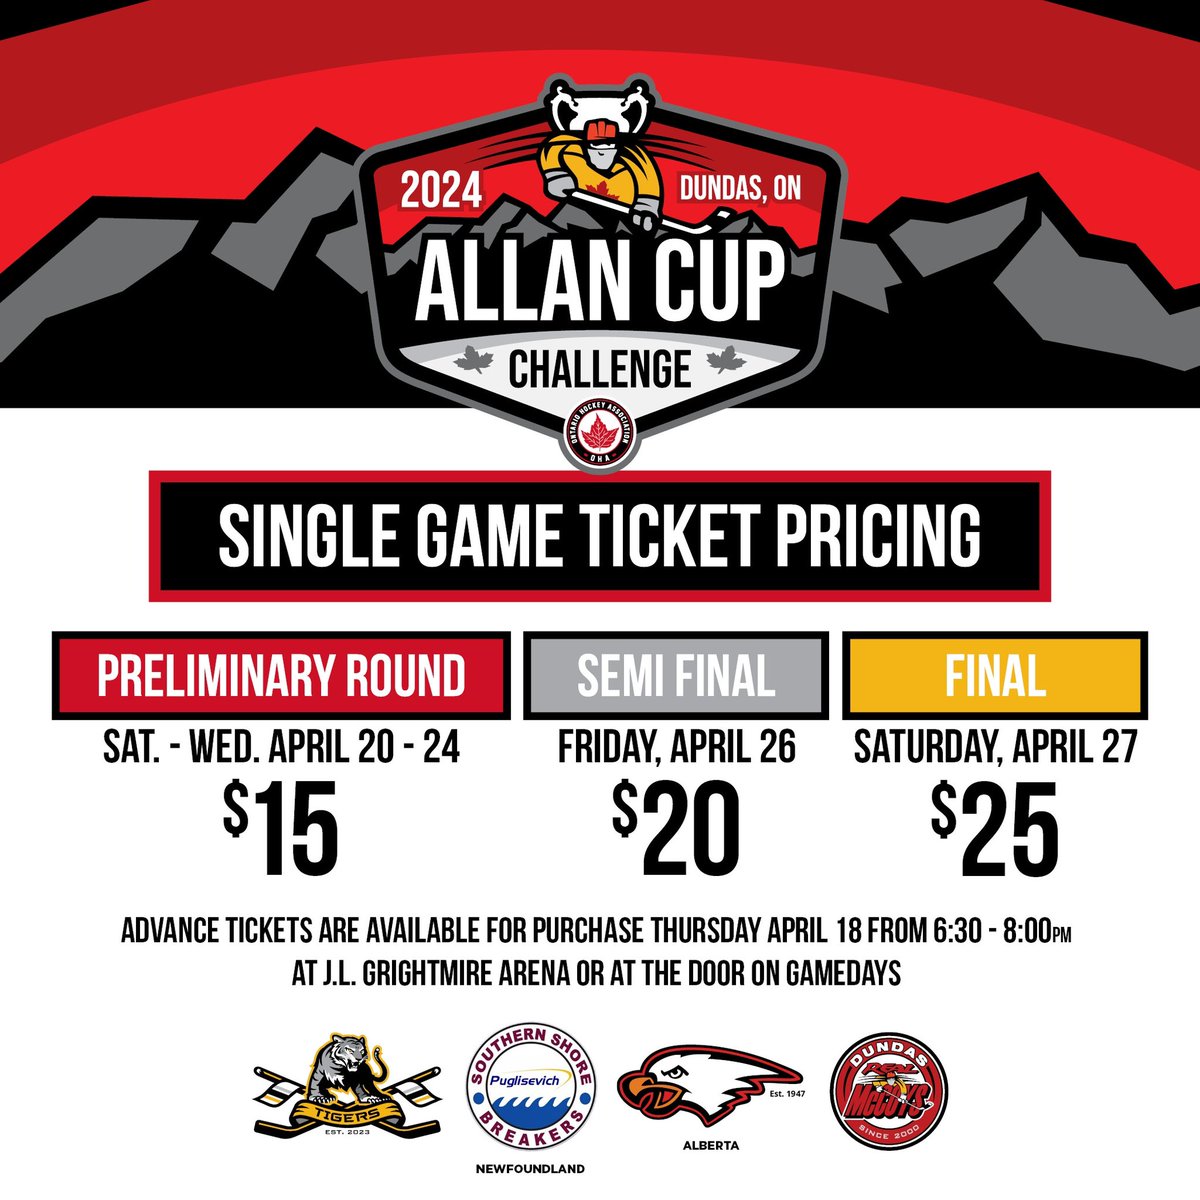 Fans wanting to purchase a Tournament Pass can do so online at eventbrite.com/e/allan-cup-ch… or by stopping by the J.L. Grightmire Arena tonight between 6:30pm and 8pm. Single game tickets are also available for purchase tonight and at the door on game days.